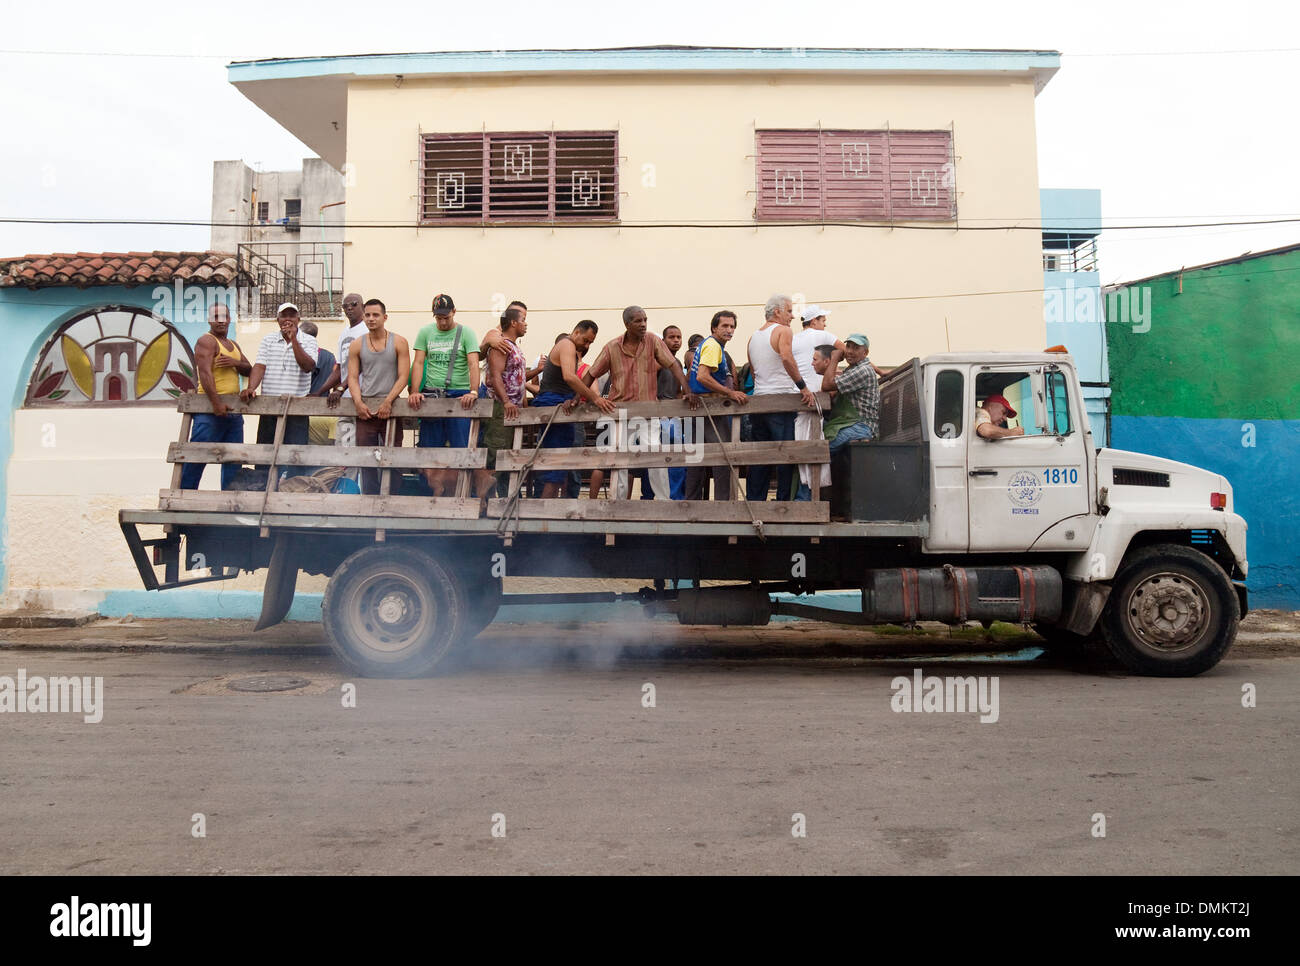 A lorry taking a large number of men off to work, Havana, Cuba, Caribbean, Latin America Stock Photo